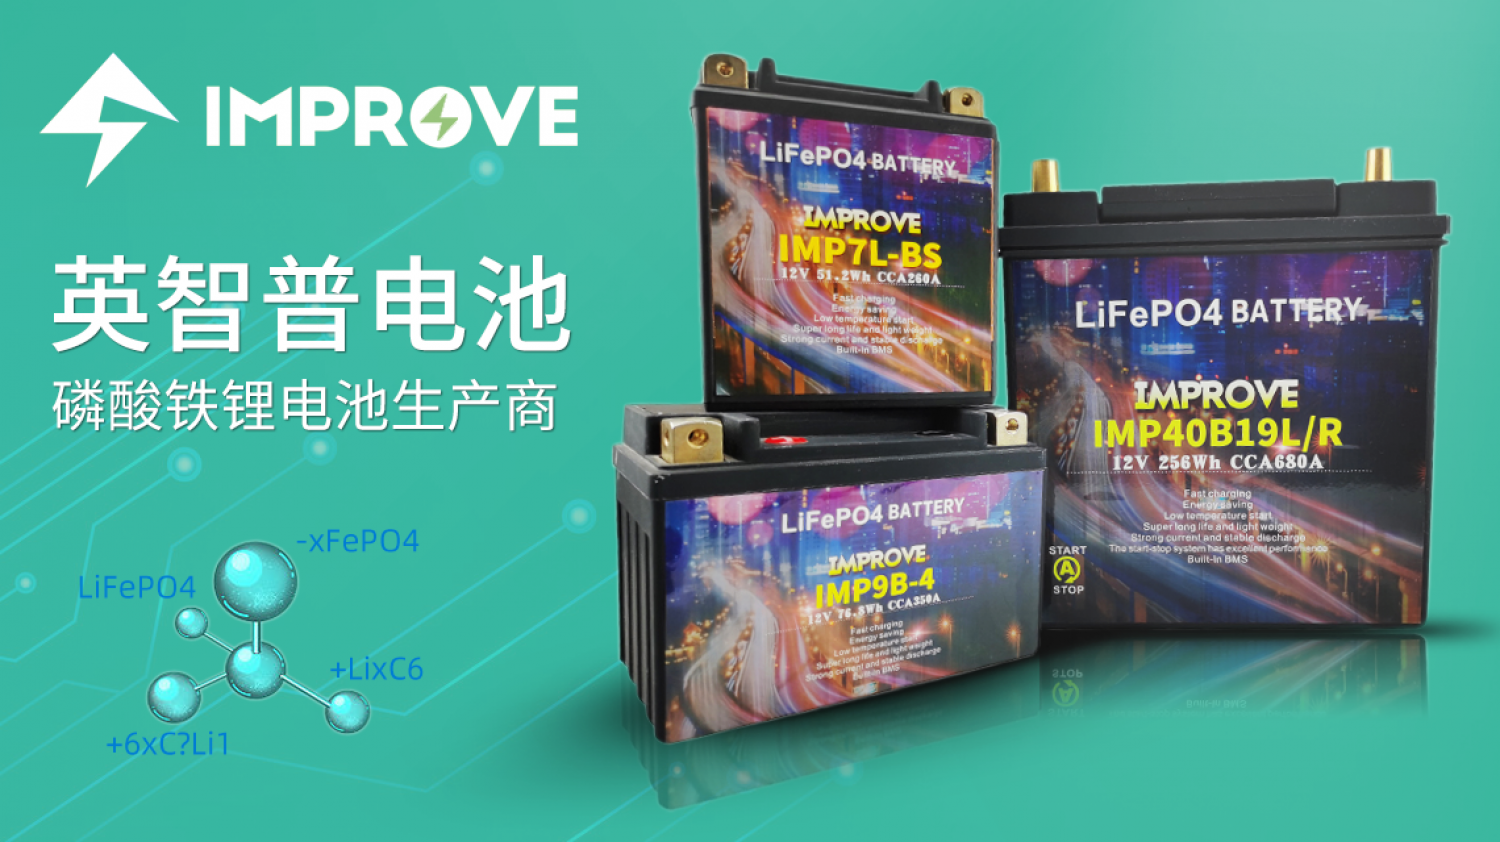 Three Major Application Advantages of Lithium Iron Phosphate Batteries Used in the Communications Industry